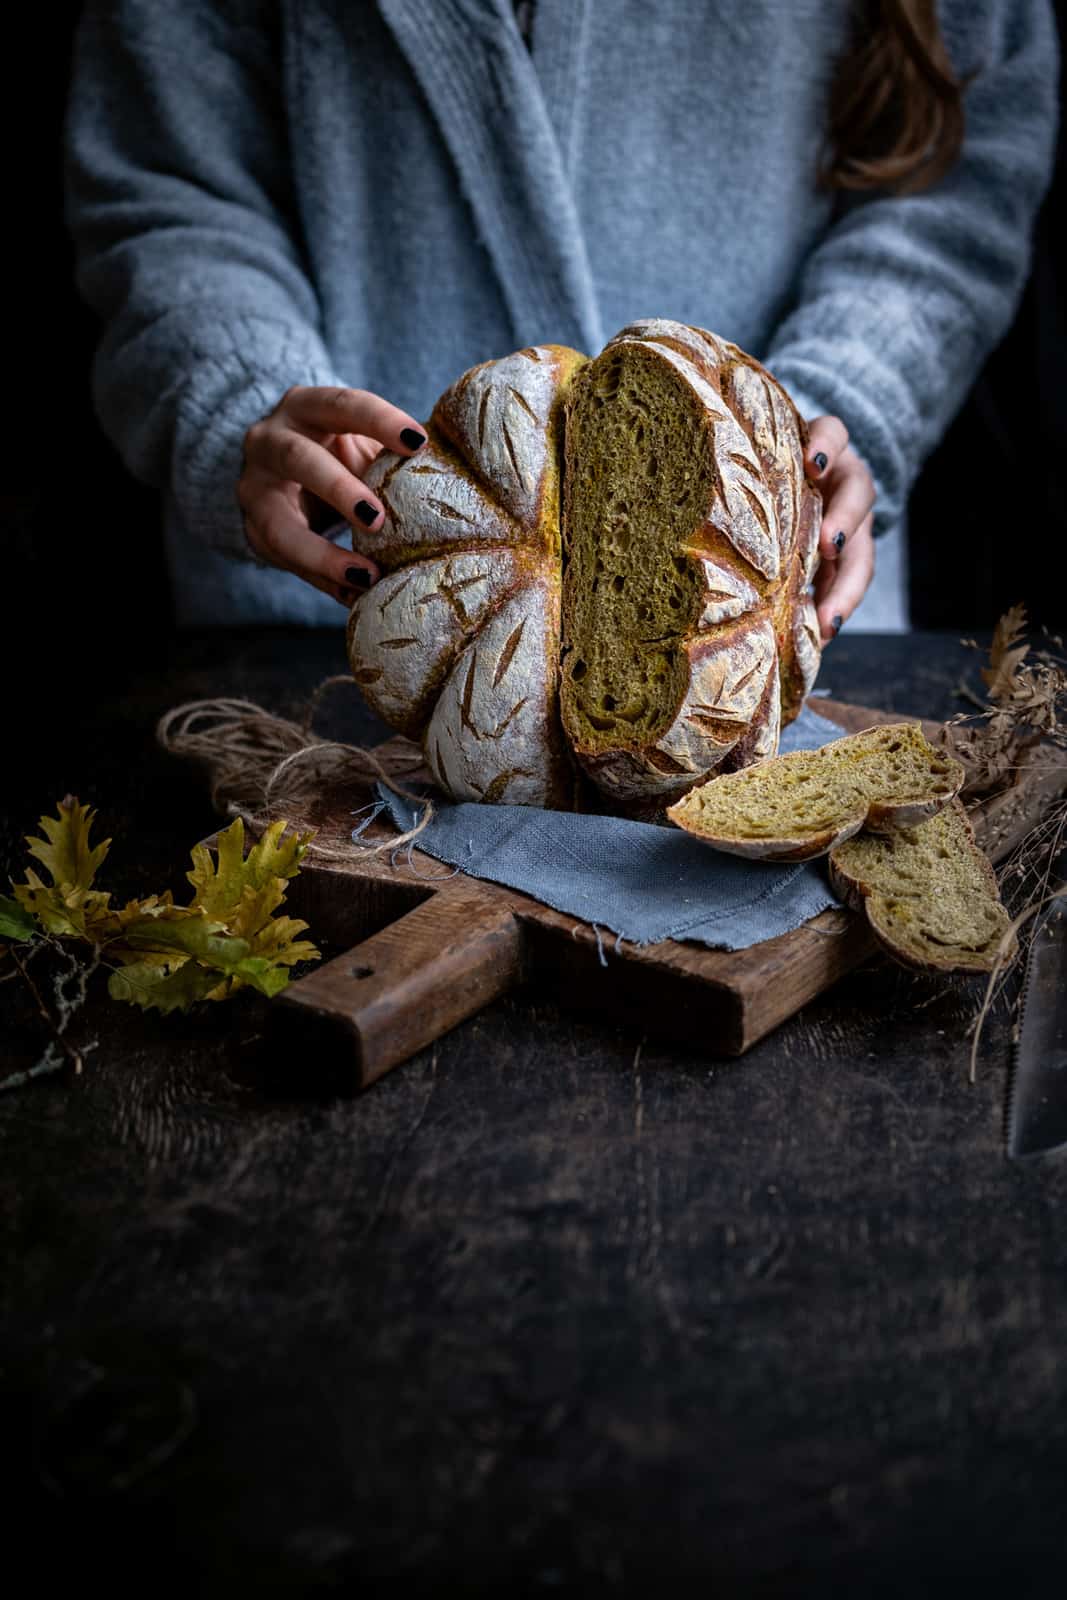 Woman holding sourdough pumpkin bread sliced in half to show the interior of the loaf